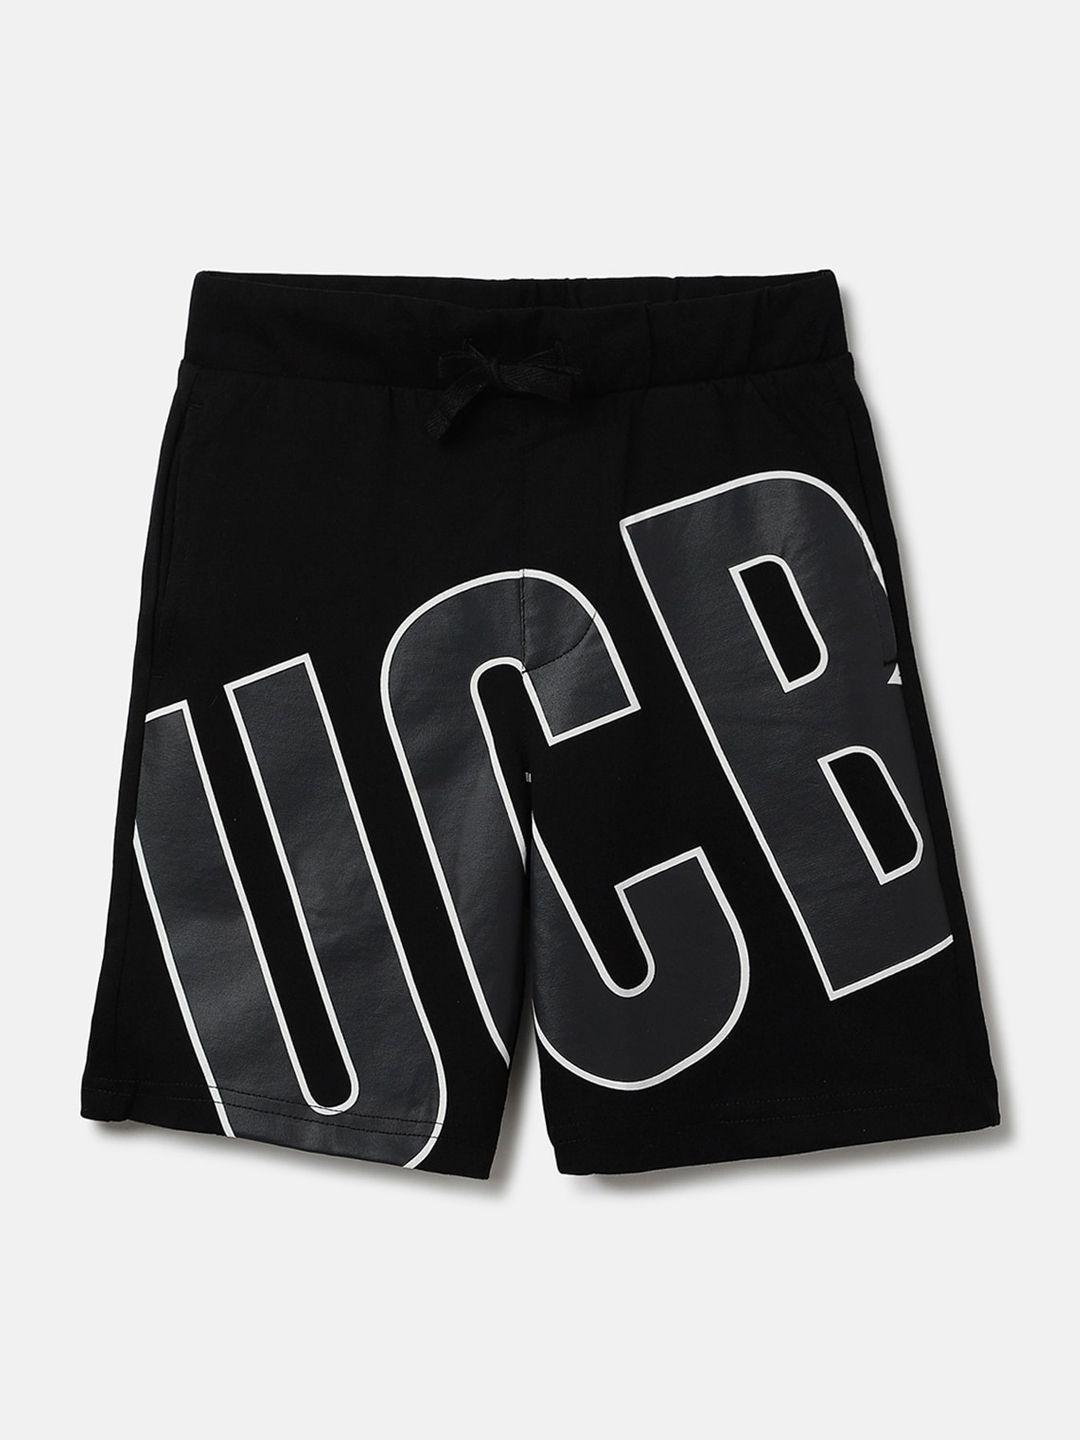 United Colors of Benetton Boys Typography Printed Sports Shorts